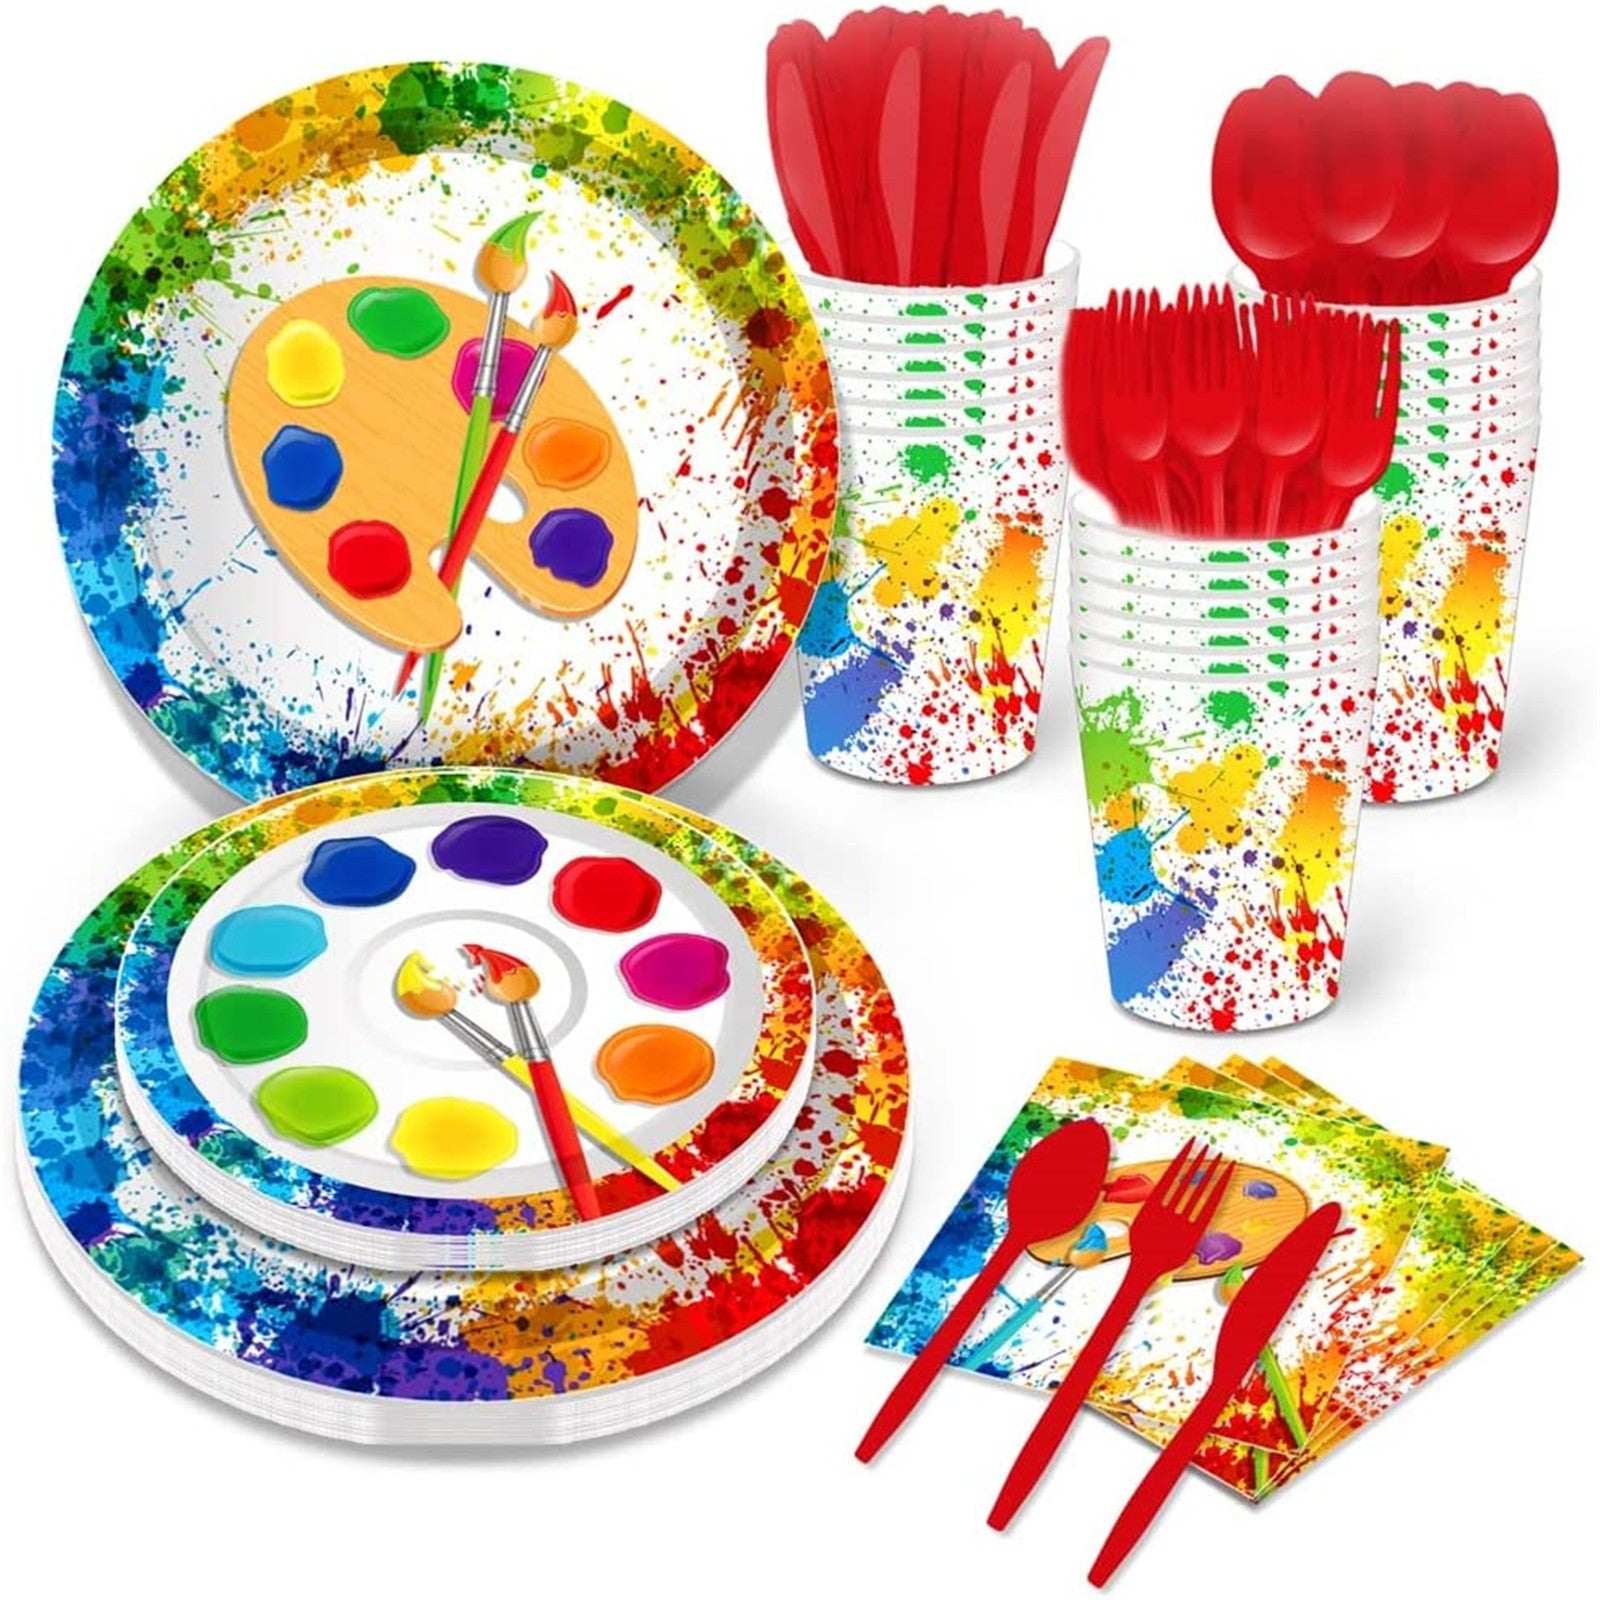 ZNTS Artist Painting Party Supplies Birthday Paper Plates Disposable Tableware Set Art Palette Paint 39171814